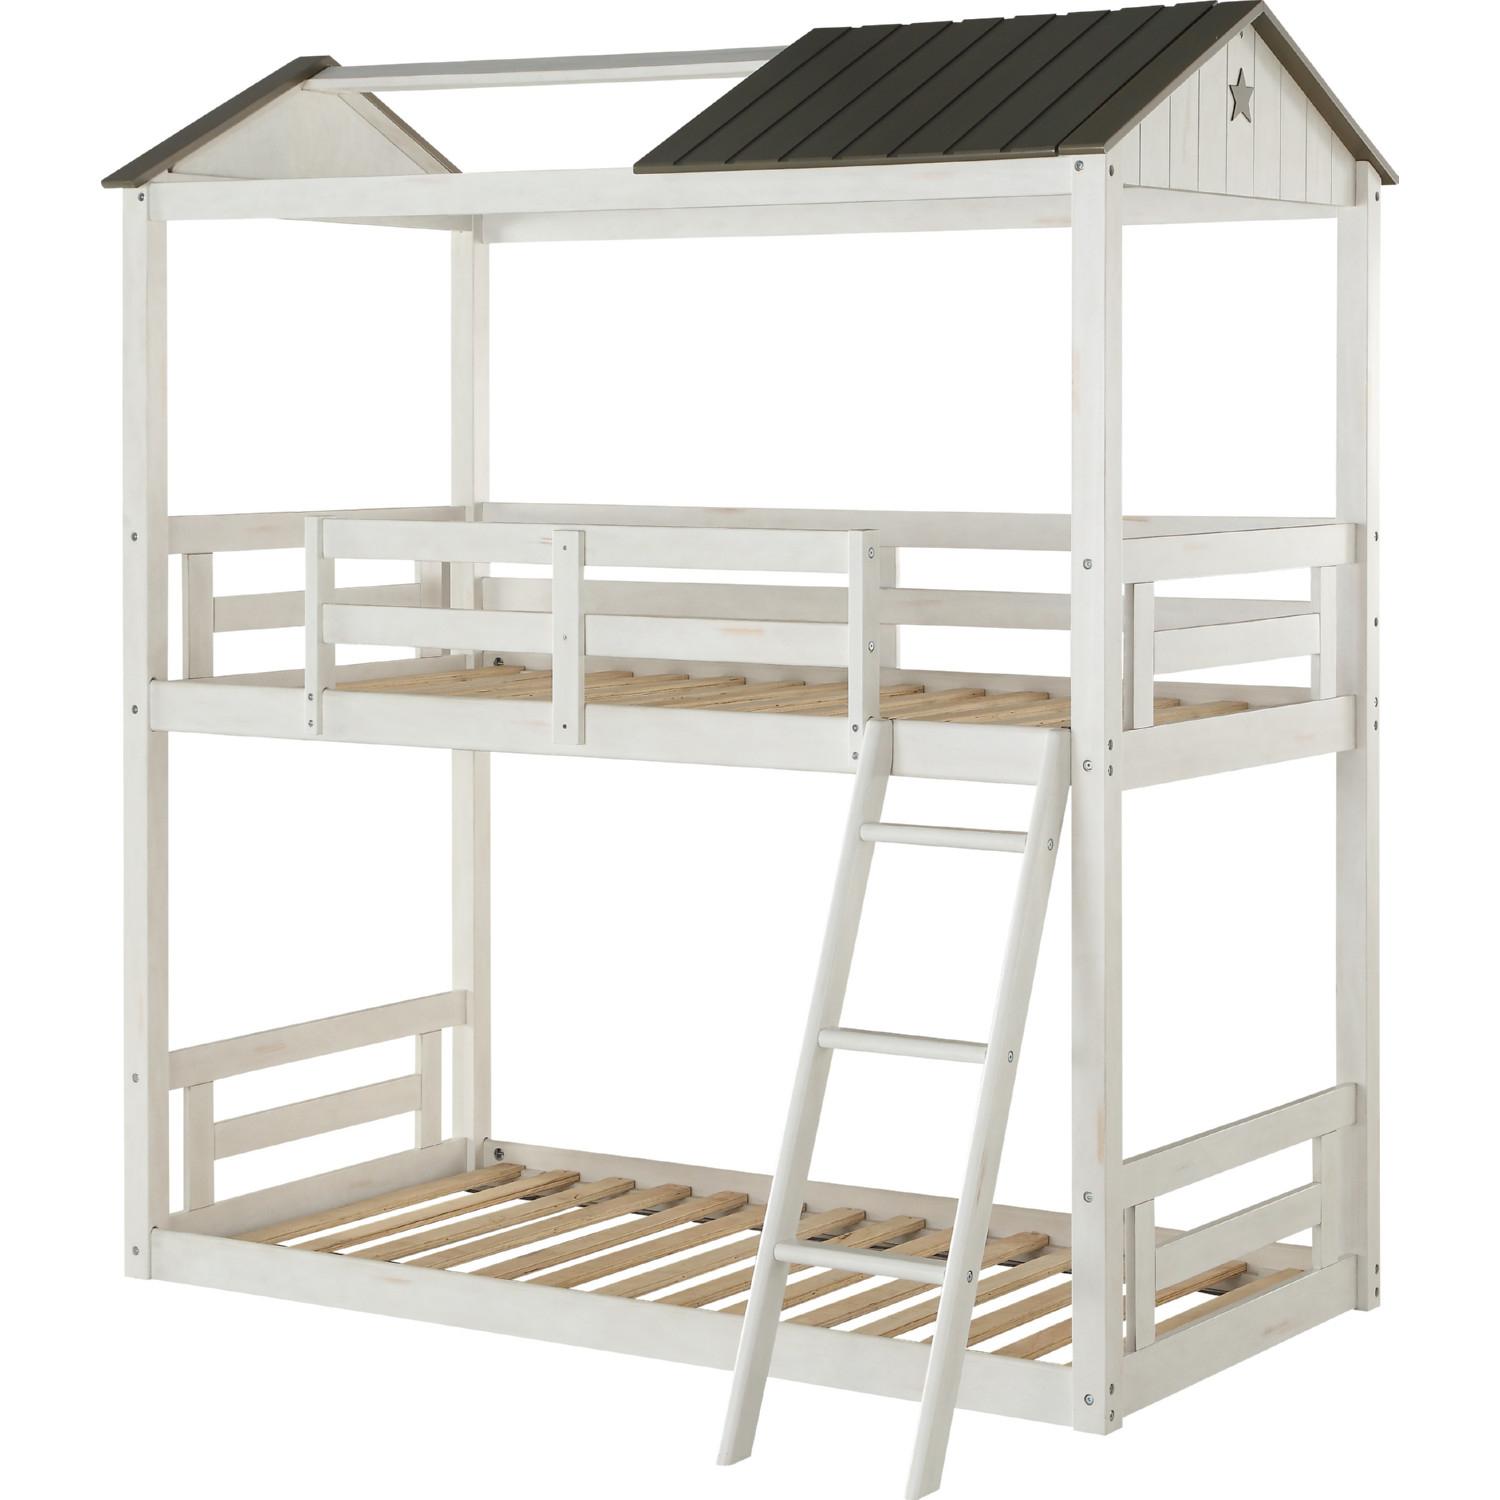 Cottage Twin/Twin Bunk Bed Nadine 37665 in White, Gray 